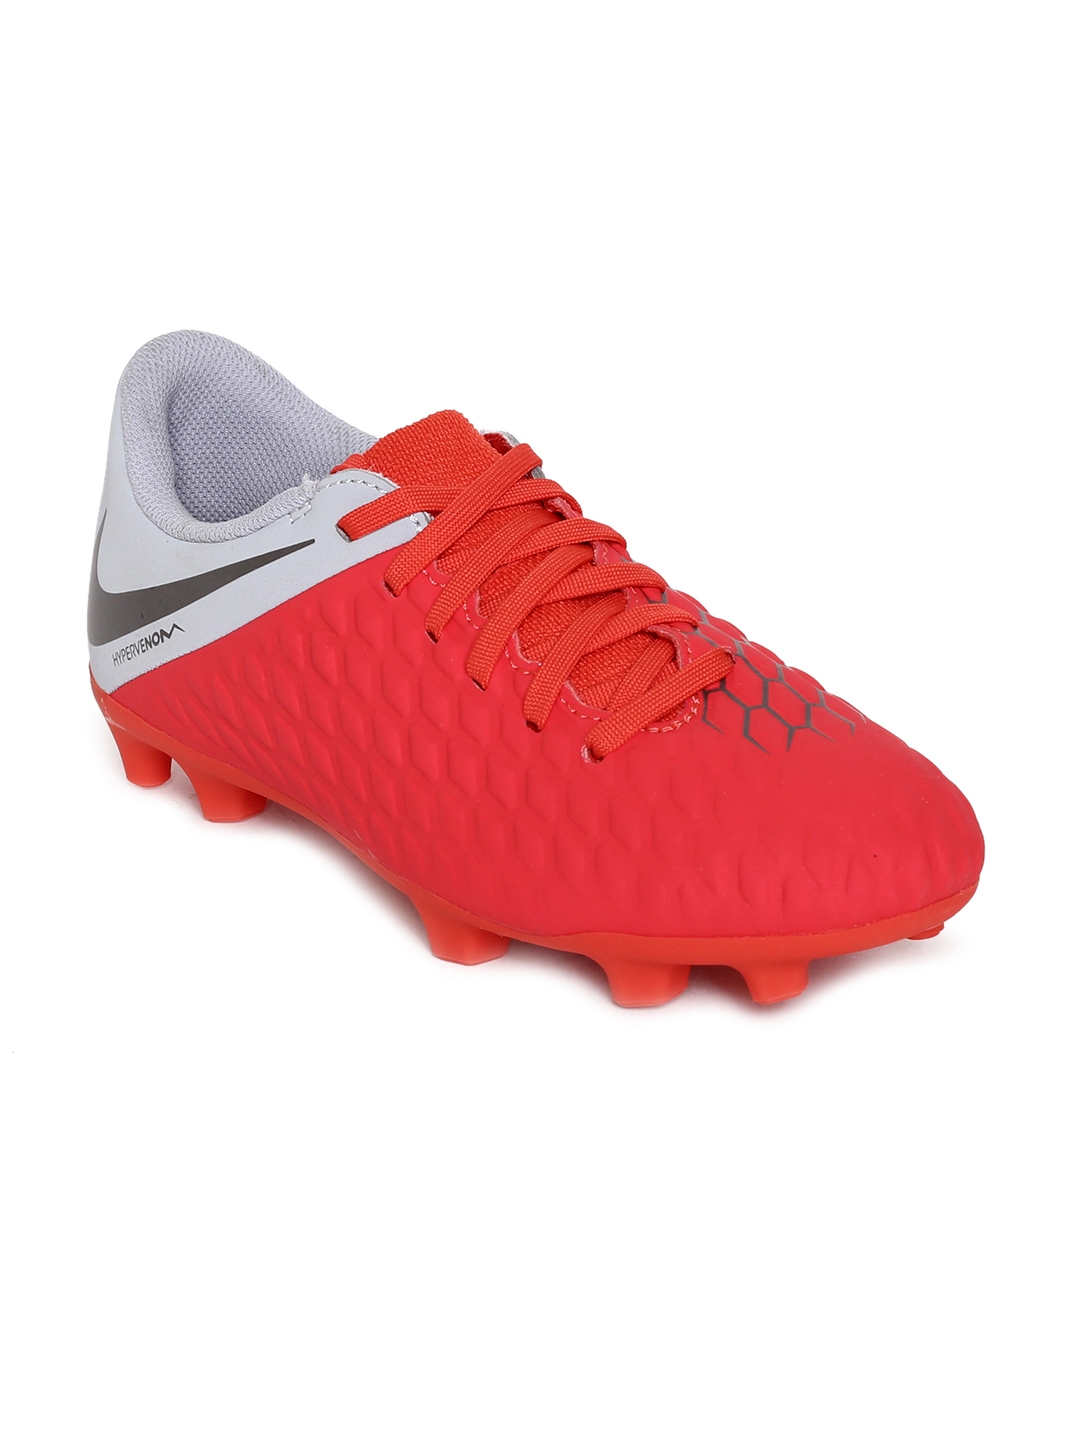 red nike football shoes